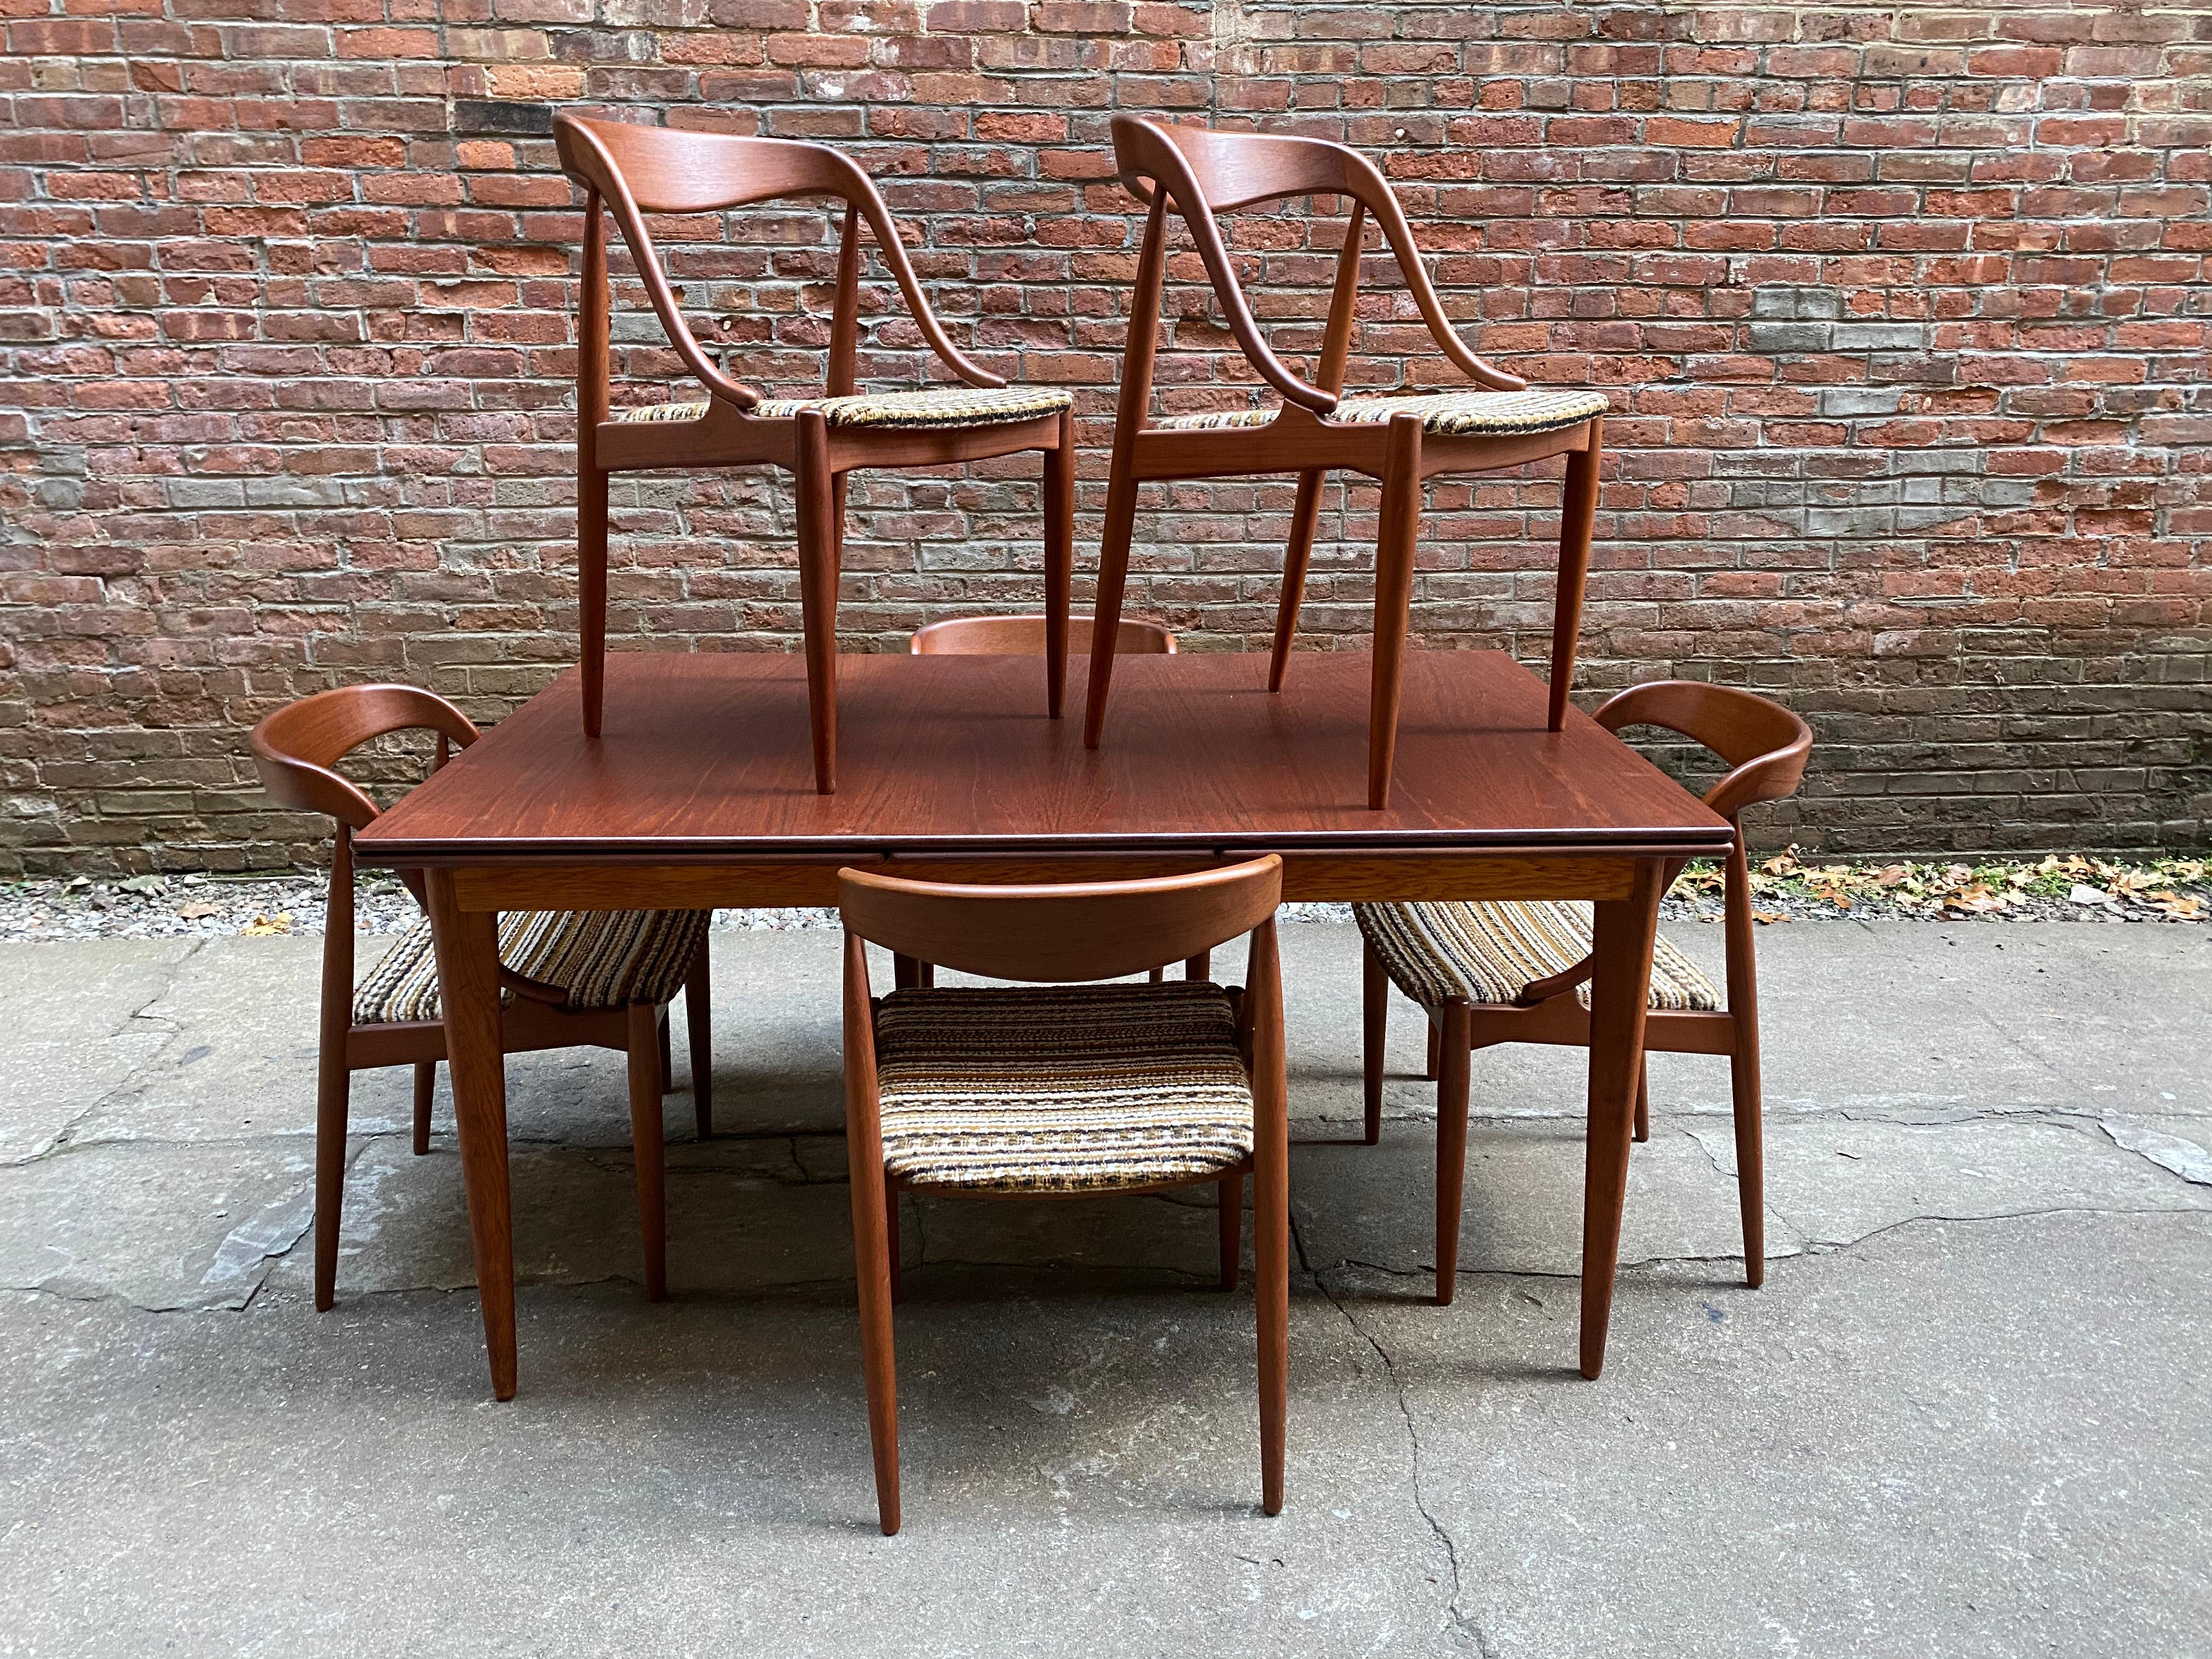 Set of six sculptural teak dining chairs by Johannes Andersen for Moreddi, Denmark. Beautiful solid teak frames with wonderful nubby wool fabric upholstered seats. A comfortable chair. Signed on seat bottoms. All are structurally sound and sturdy.